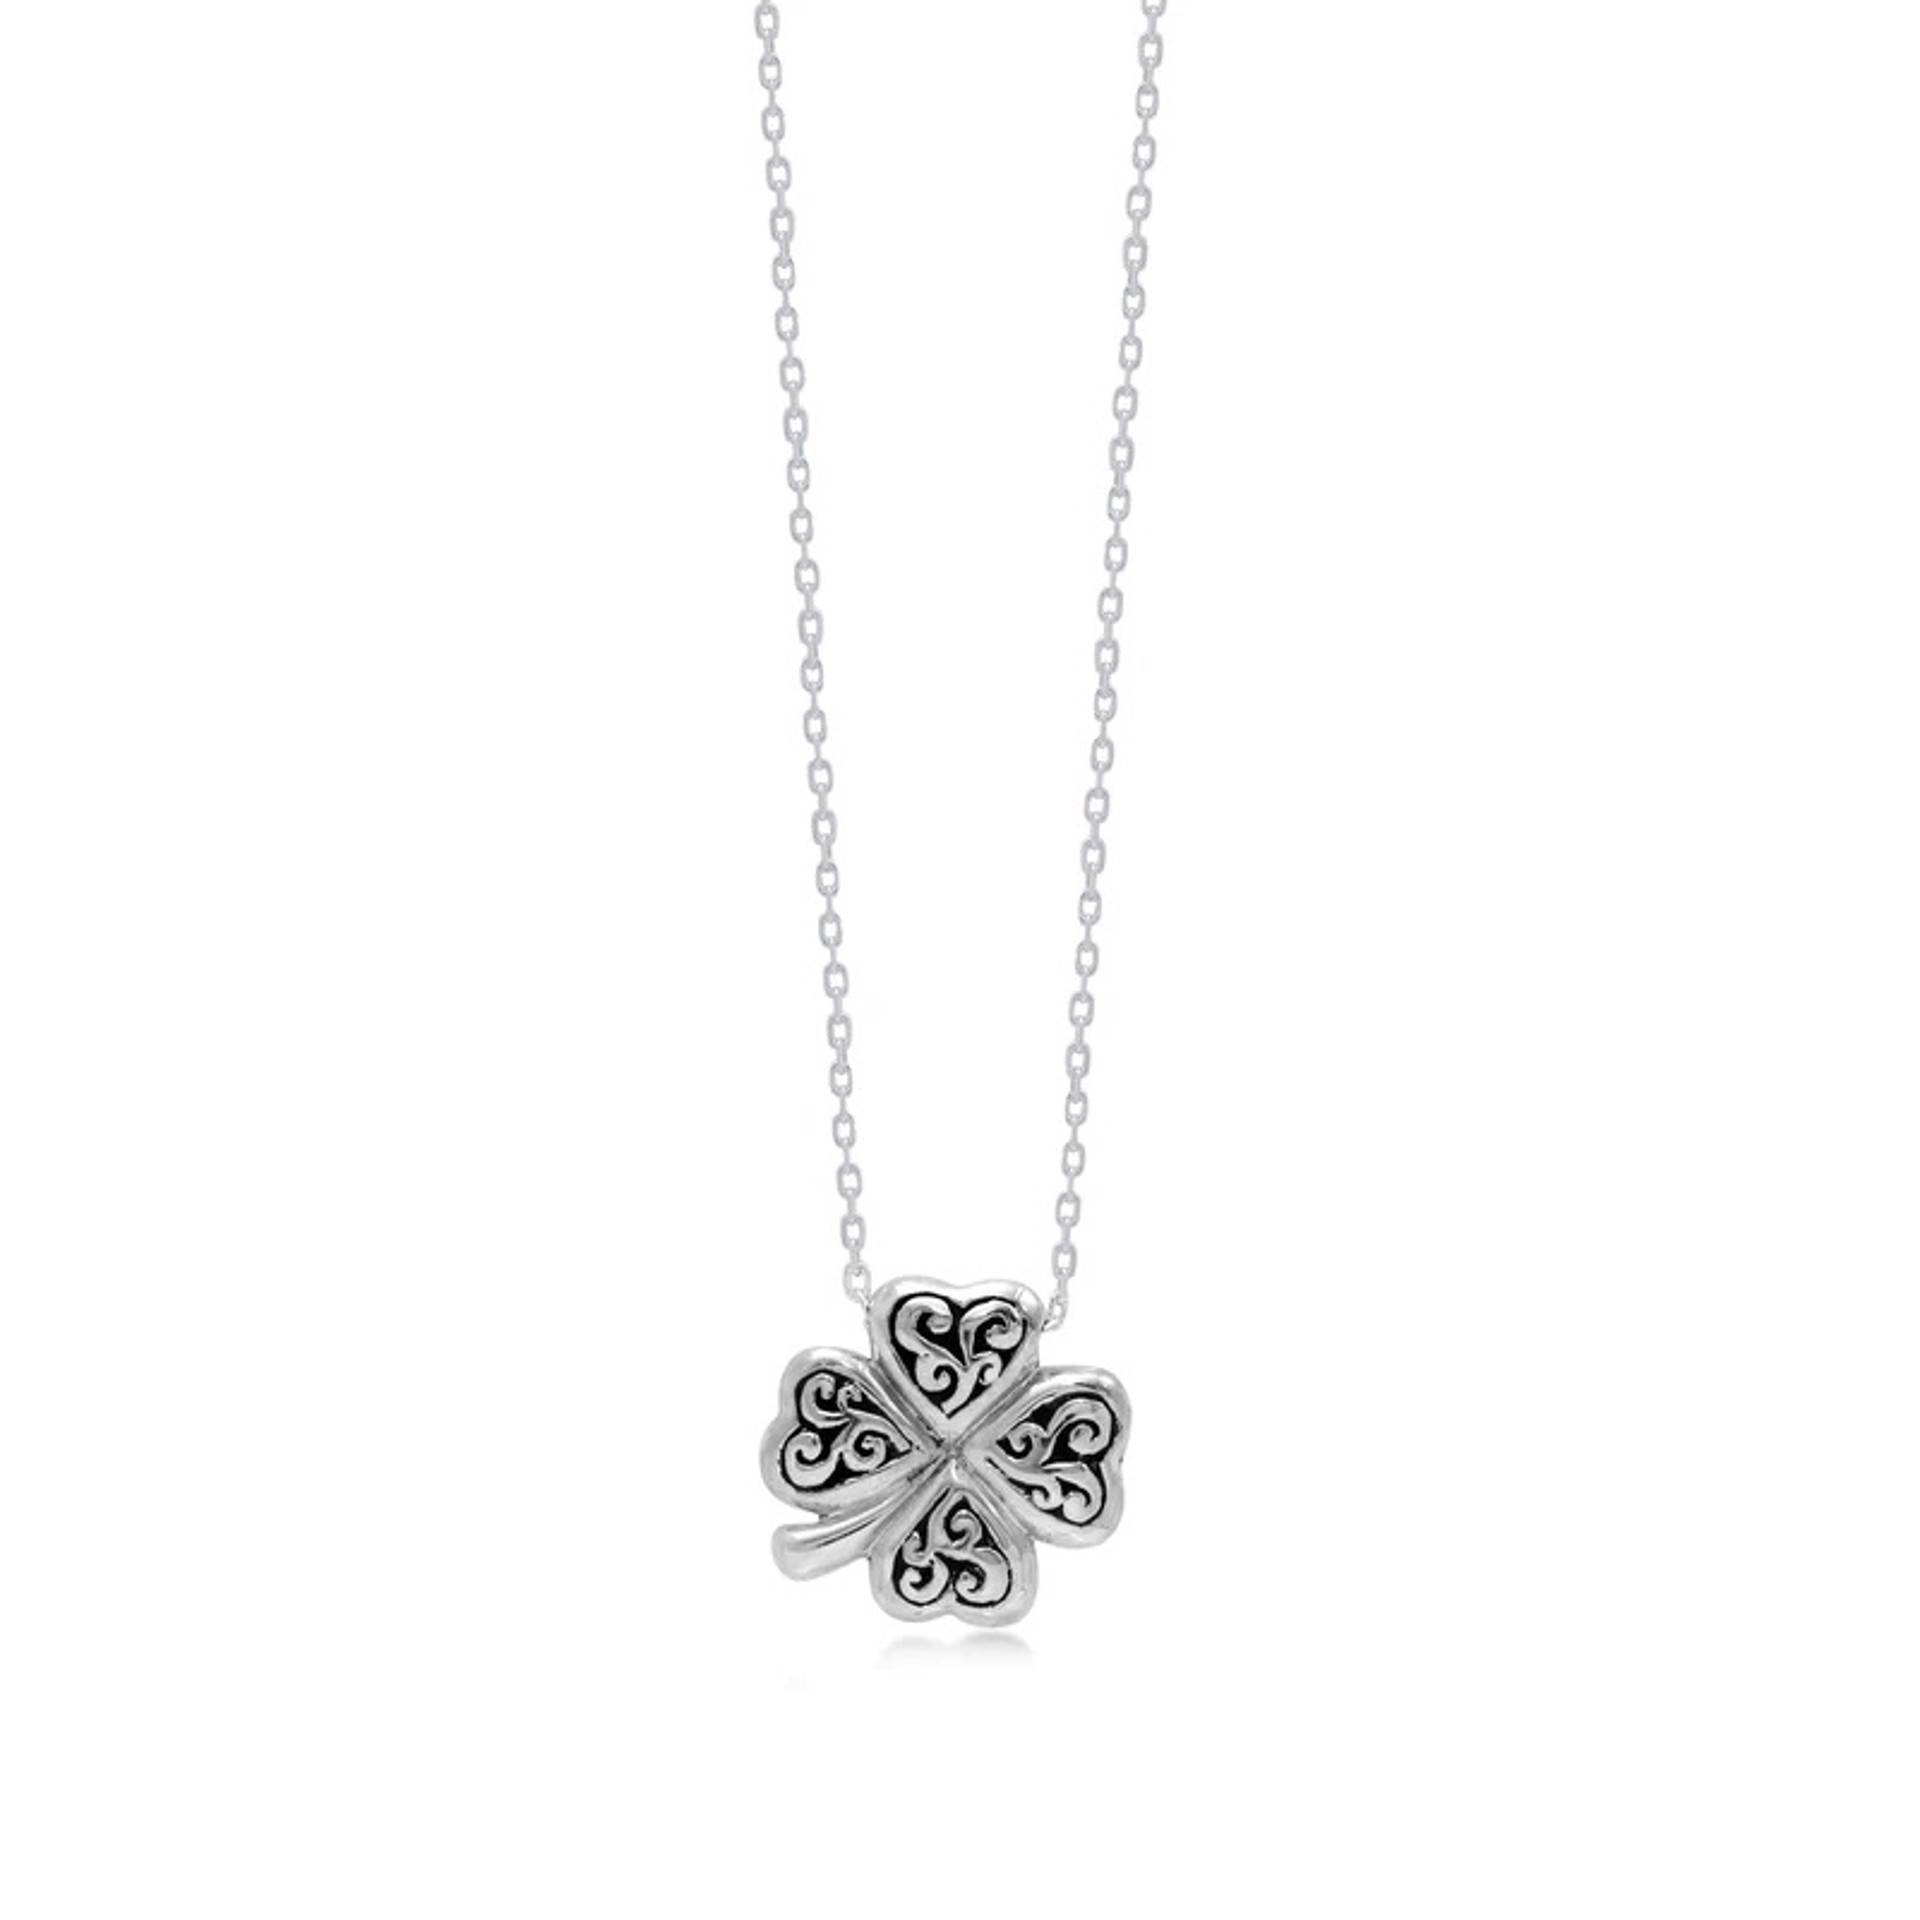 Delicate Clover Leaf Pendant Necklace by Lois Hill